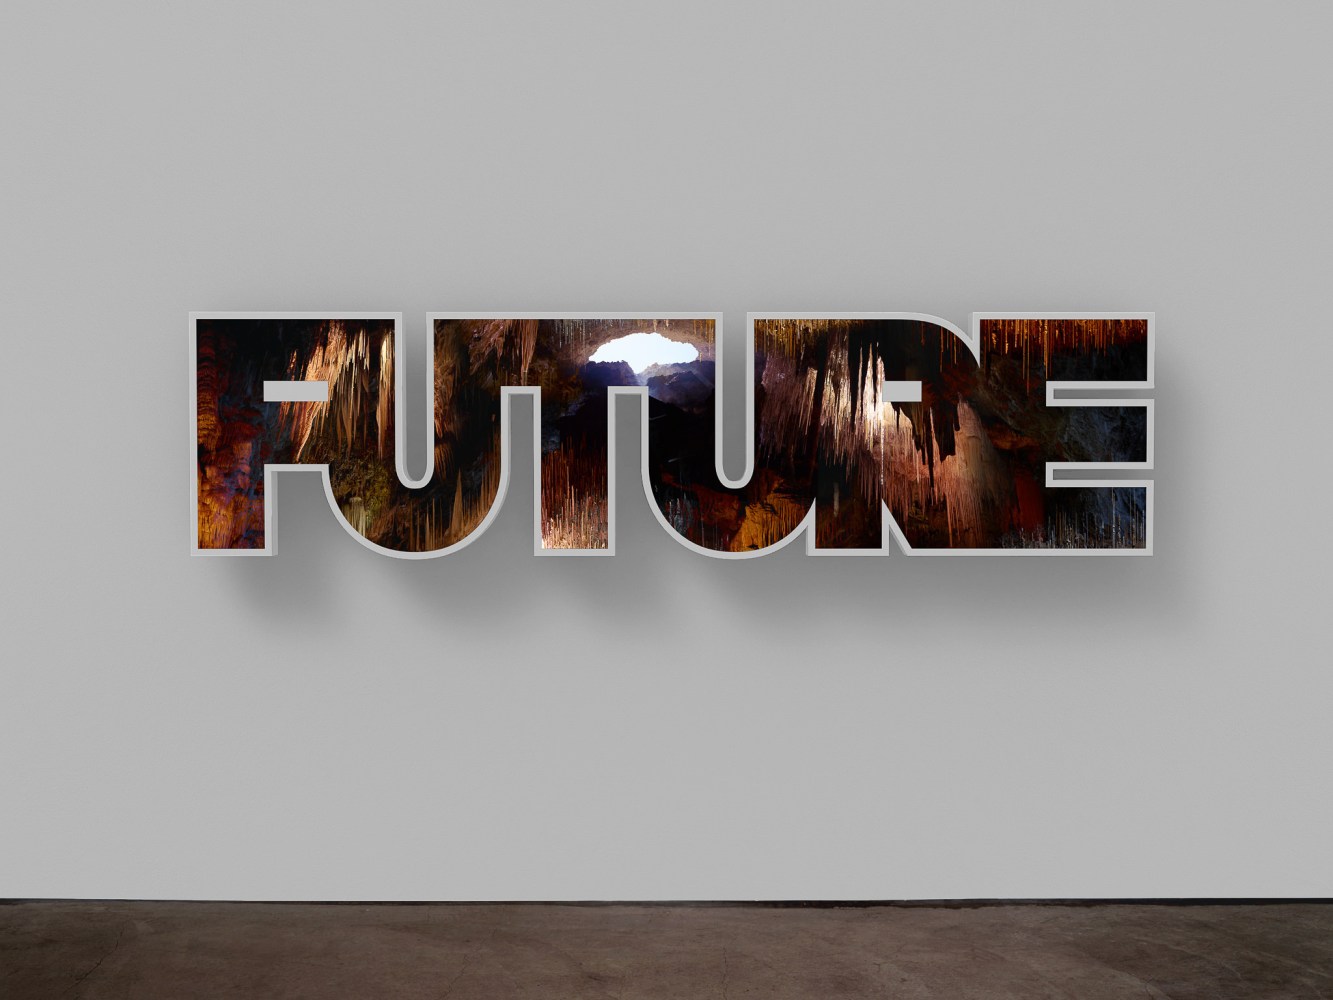 Doug Aitken

FUTURE (open doors)

2020

Chromogenic transparency on acrylic in aluminum lightbox with LEDs

34 3/8 x 136 x 7 inches (87.3 x 345.4 x 17.8 cm)

Edition of 4, with 2AP

DA 680

$225,000

&amp;nbsp;

INQUIRE